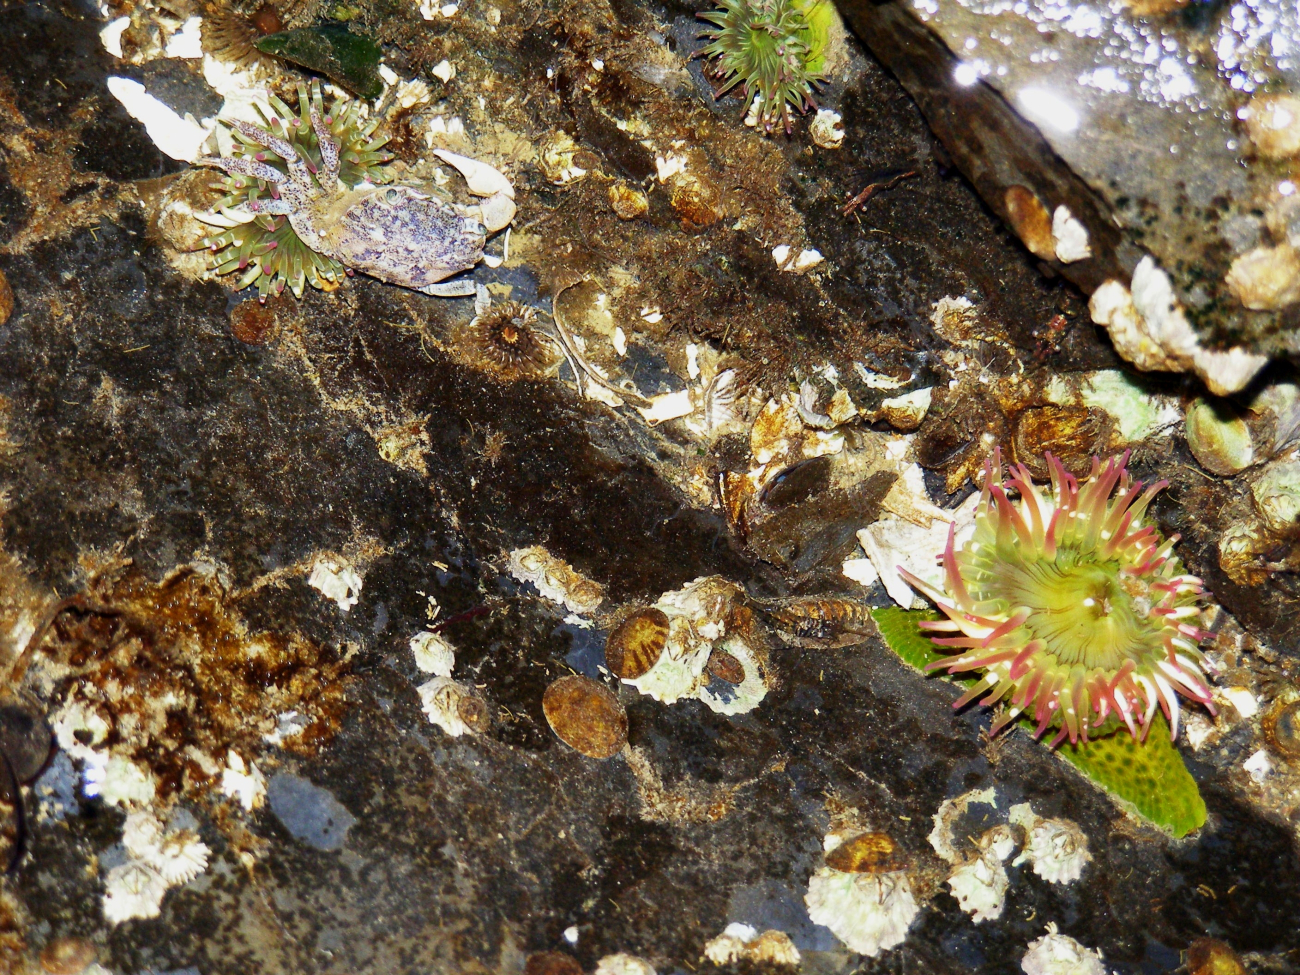 Closeup of Aleutian tidepool with anemones, limpets, and barnacles